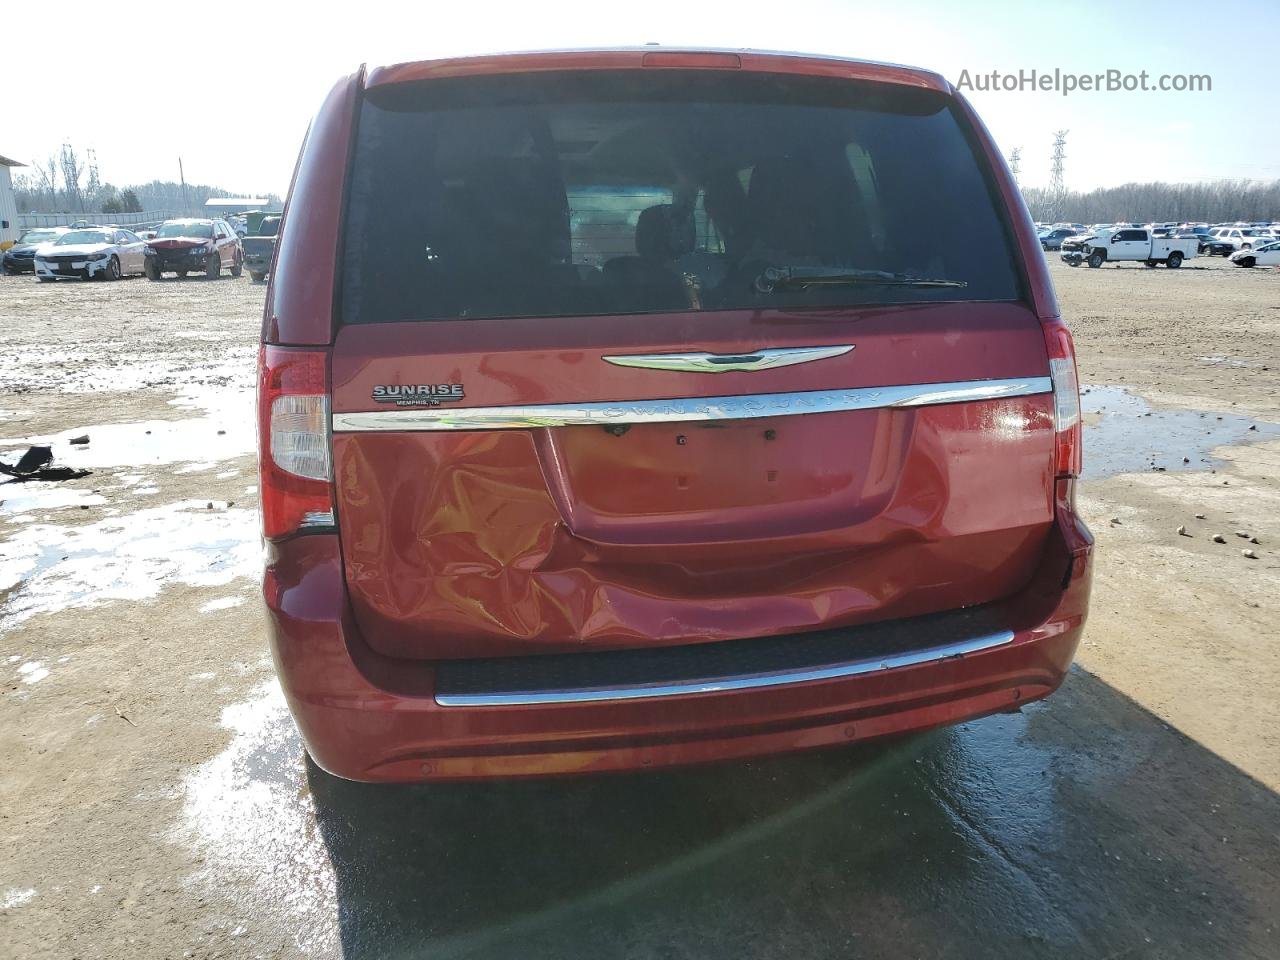 2011 Chrysler Town & Country Touring Бордовый vin: 2A4RR5DG3BR705024